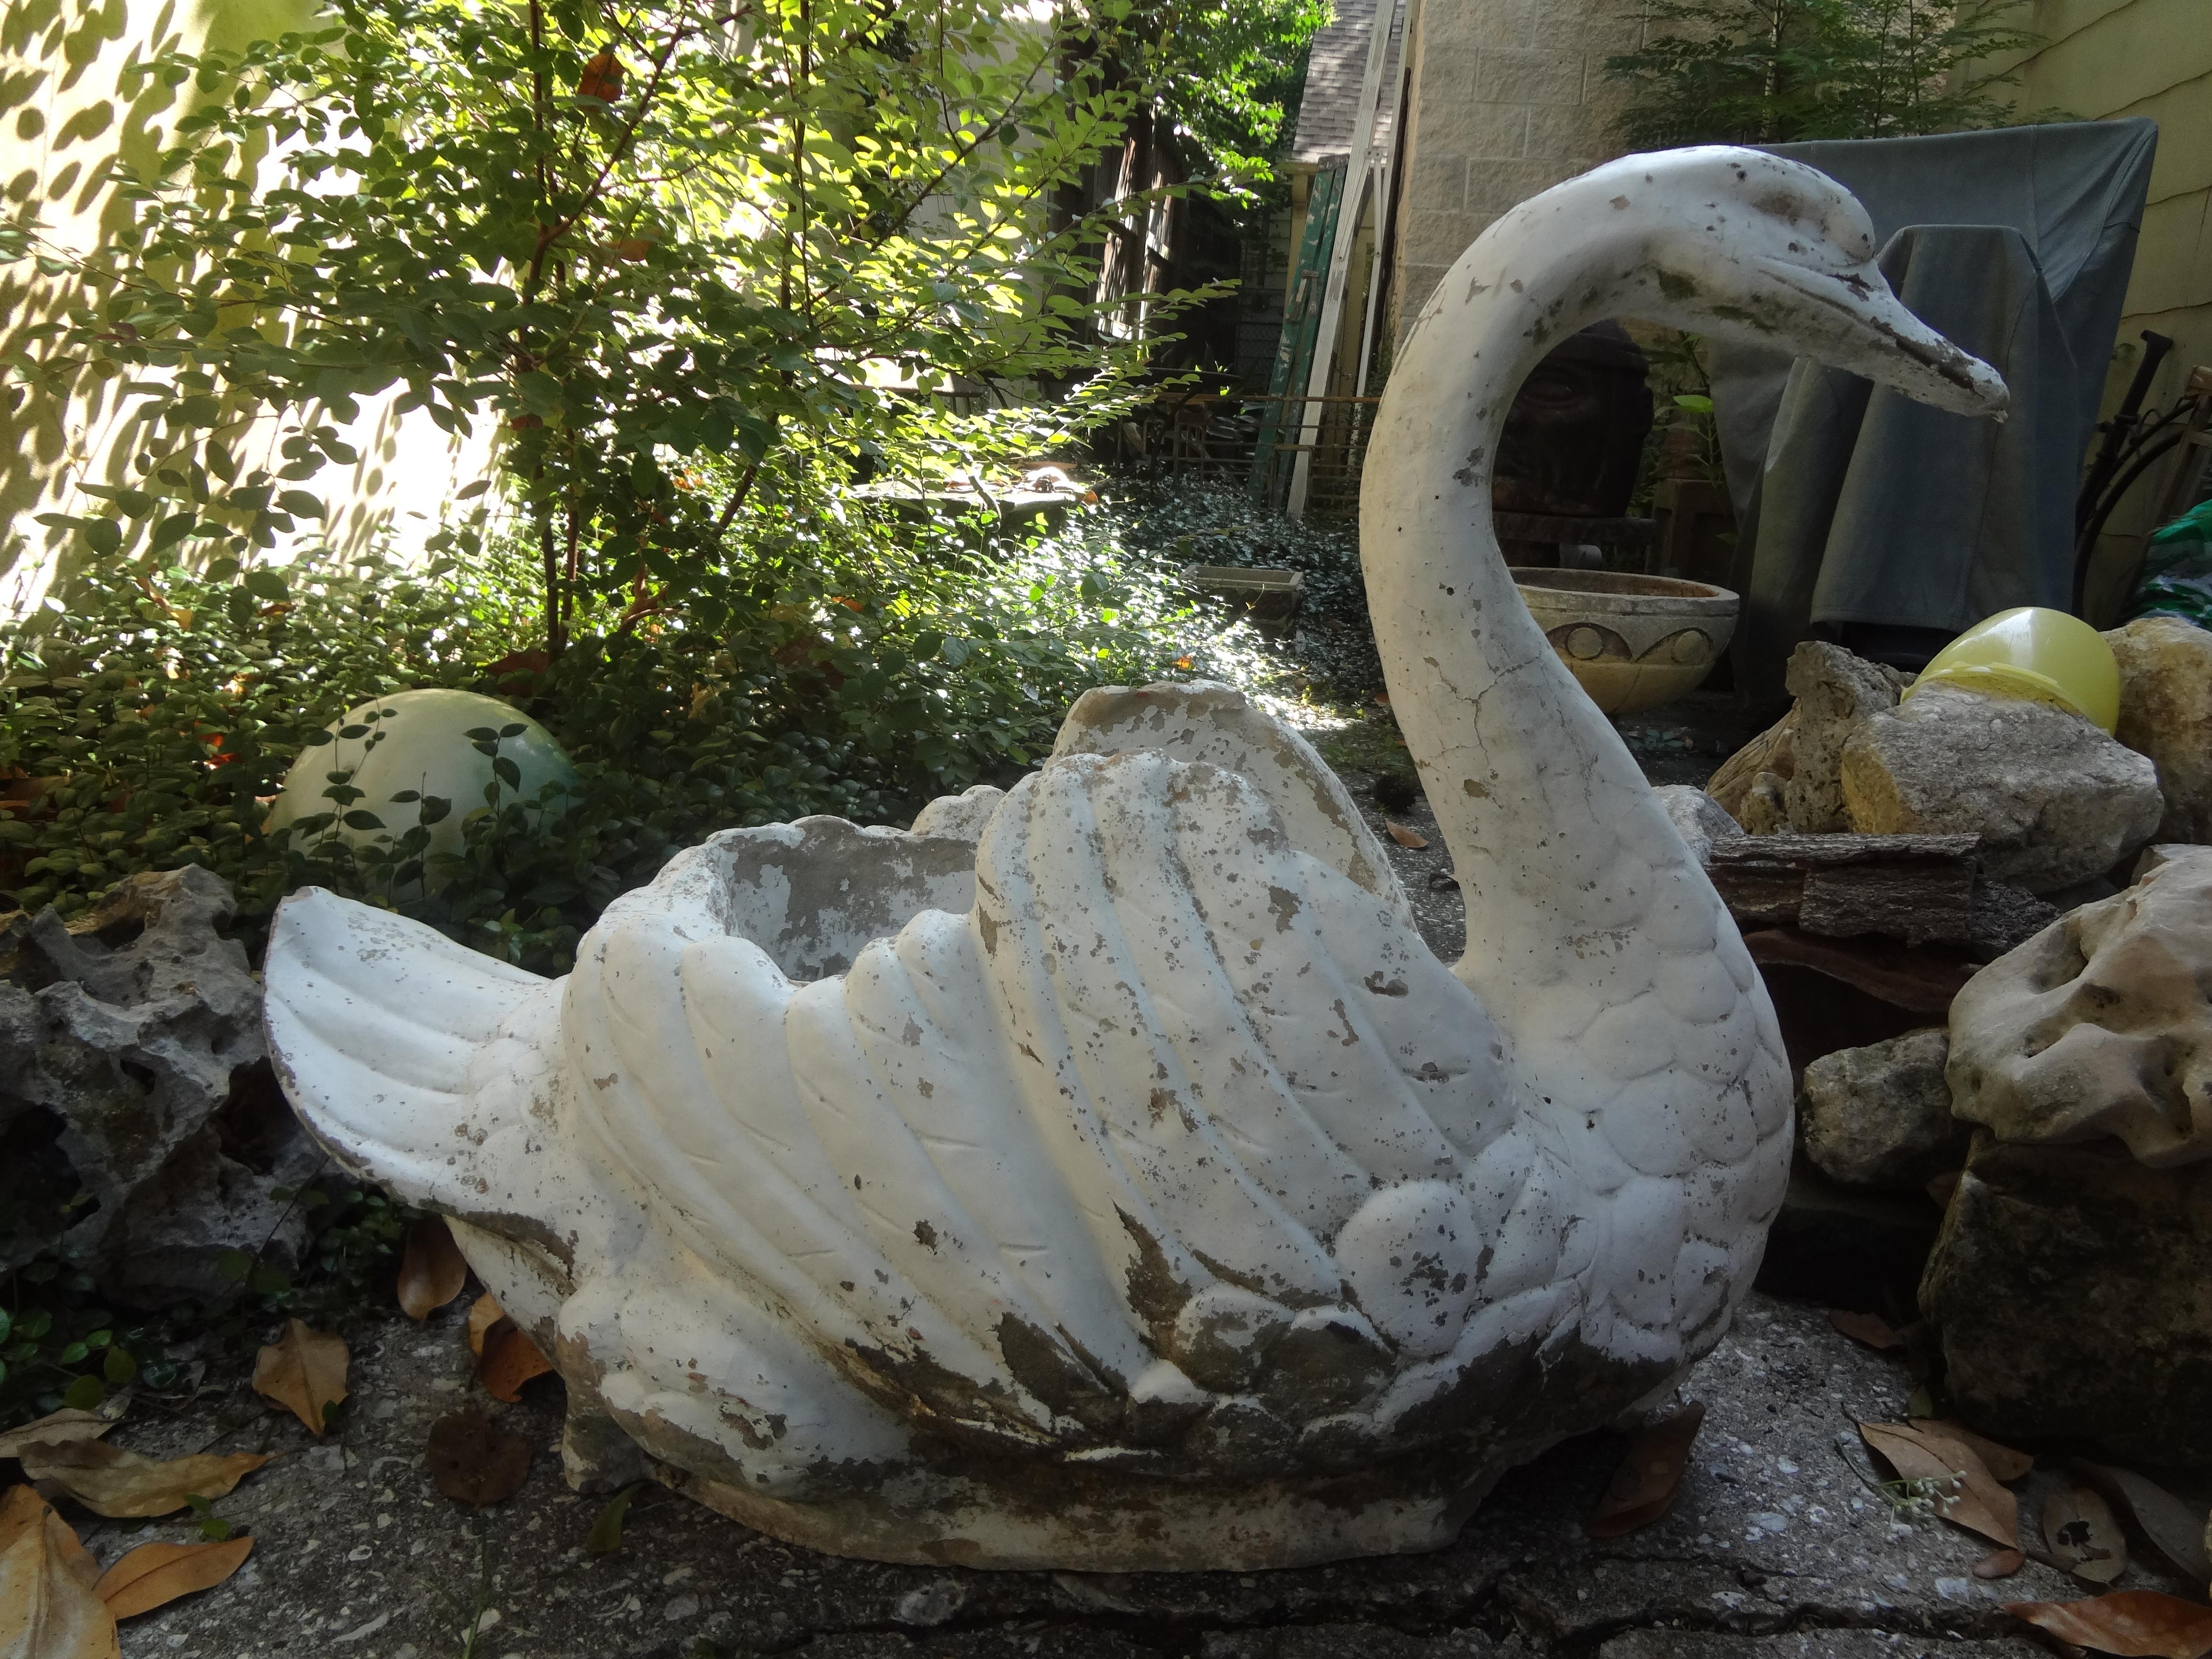 Monumental painted concrete or cement garden swan planter or jardinière. This huge swan planter dates to the 1940s and has great original paint. This huge garden ornament would look great in a garden or on a patio.